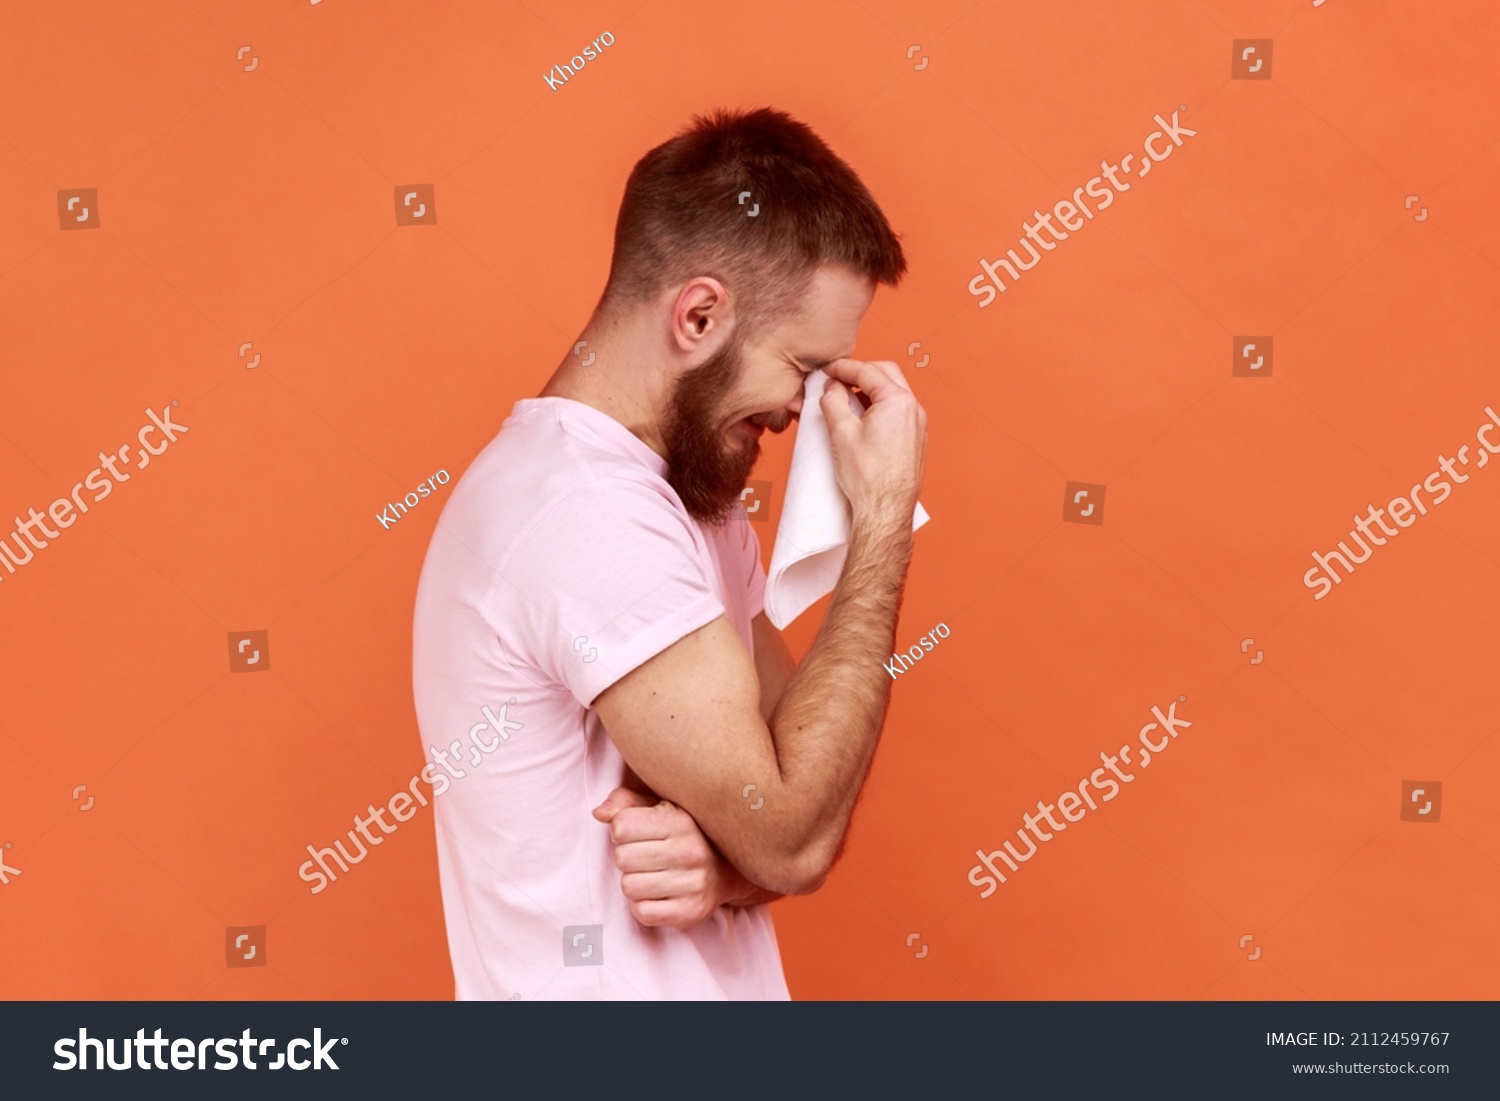 Portrait of sad alone hopeless bearded man standing, holding his head down and crying, wipes tears with handkerchief, wearing pink T-shirt. Indoor studio shot isolated on orange background. #2112459767